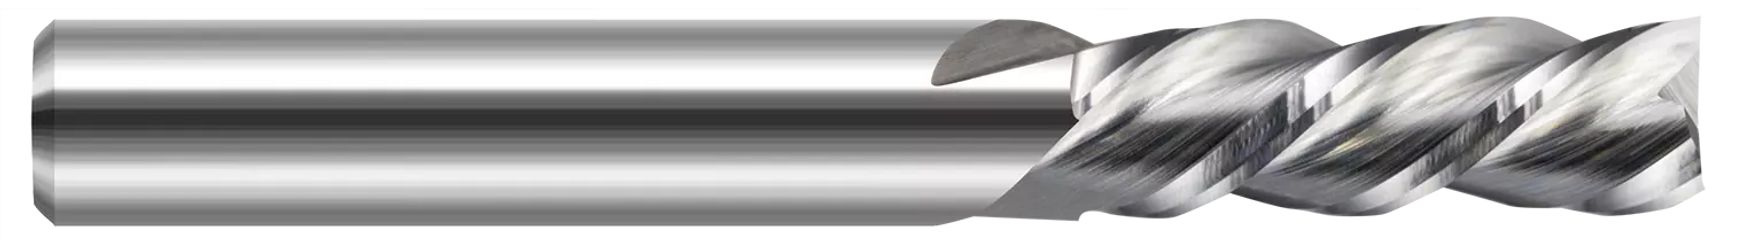 Variable Helix End Mills for Aluminum Alloys-Square-Downcut